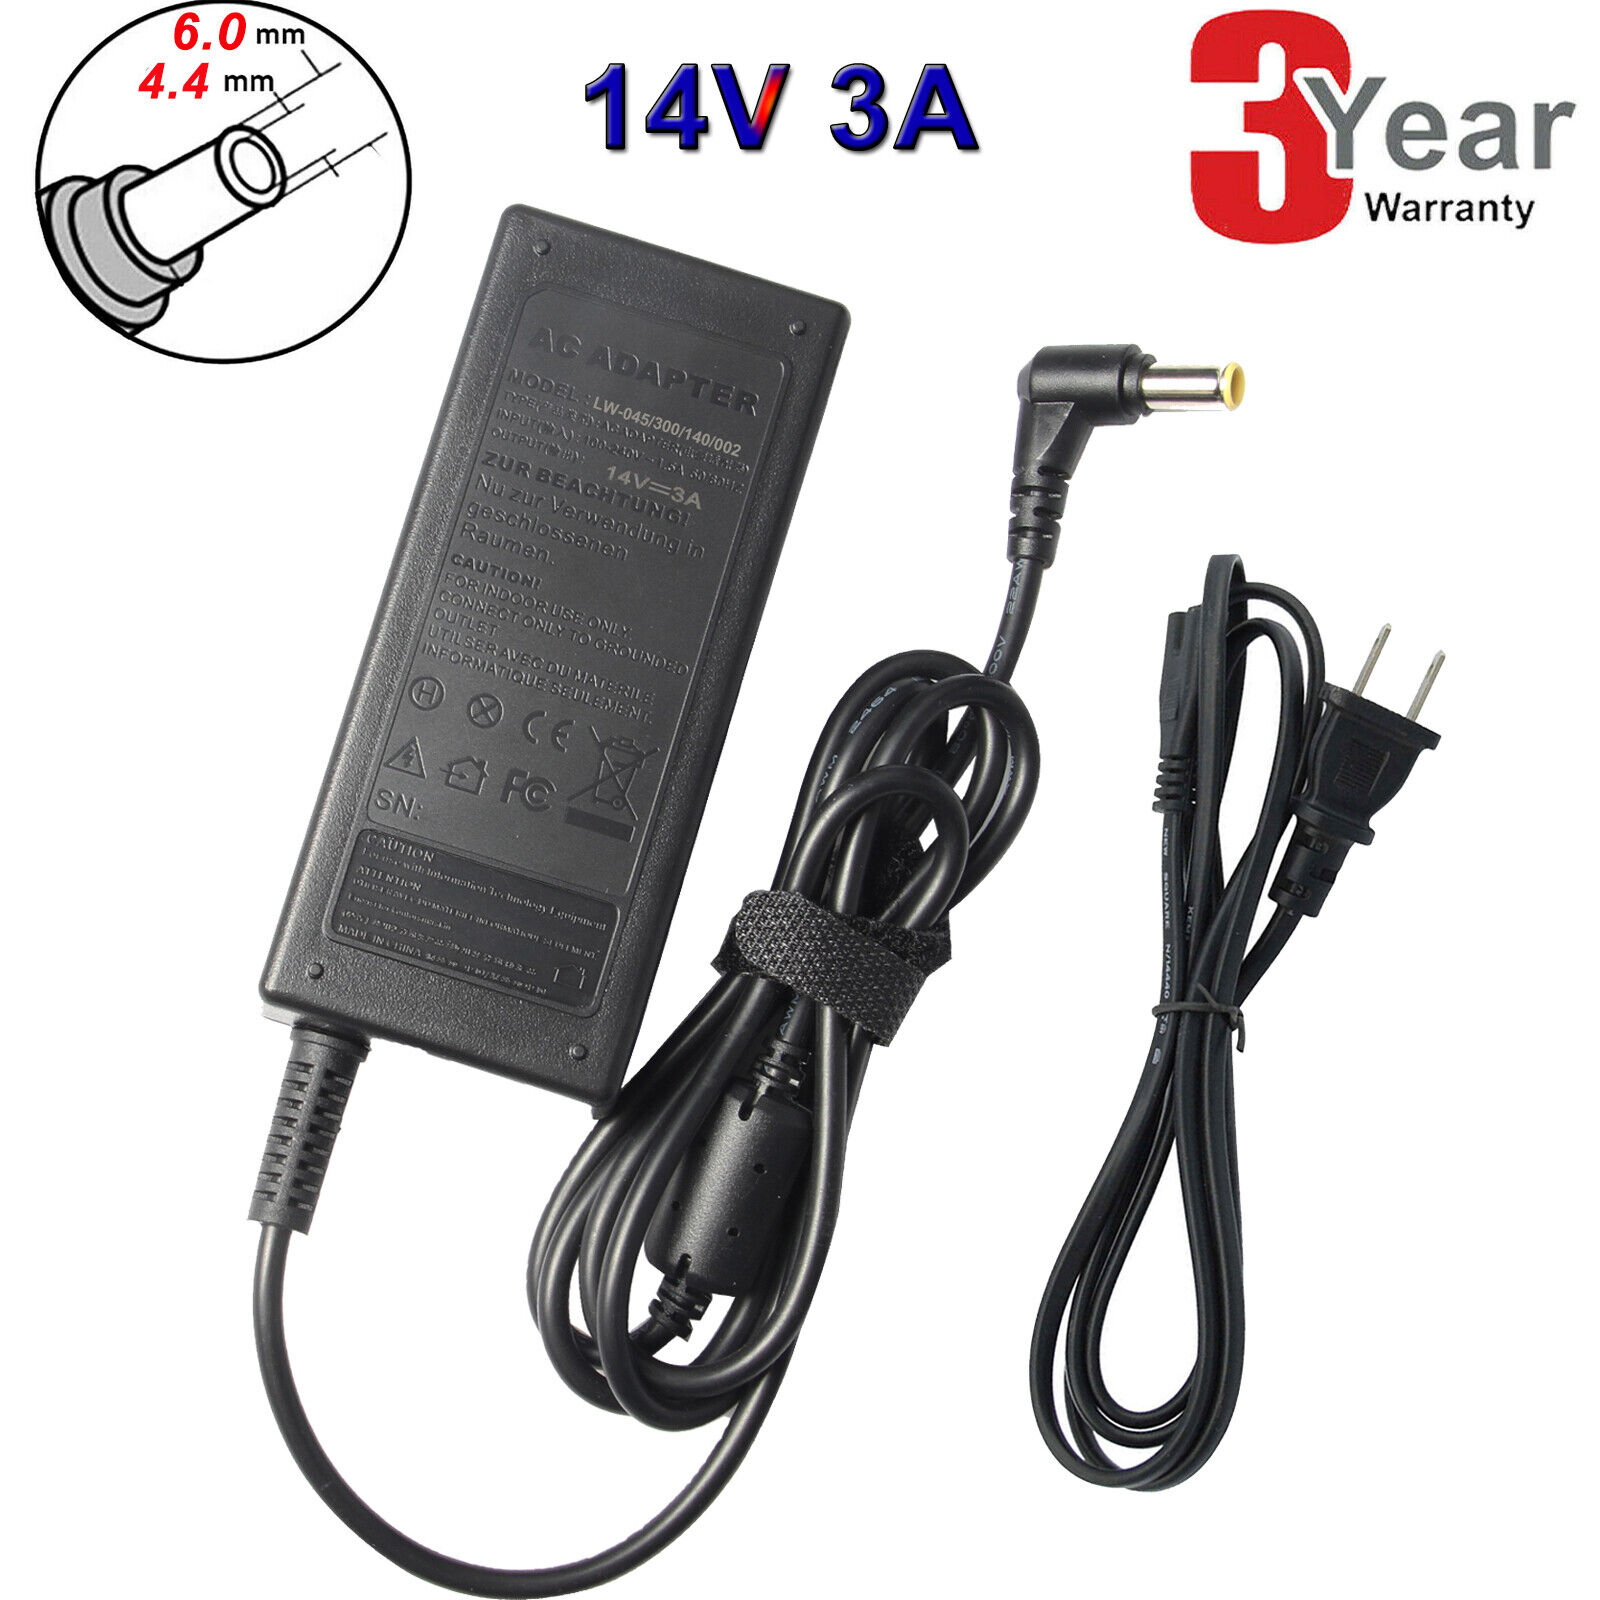 DC 14V AC Adapter For Samsung LW17E24CB LCD TV Power Supply Charger PSU+Cord